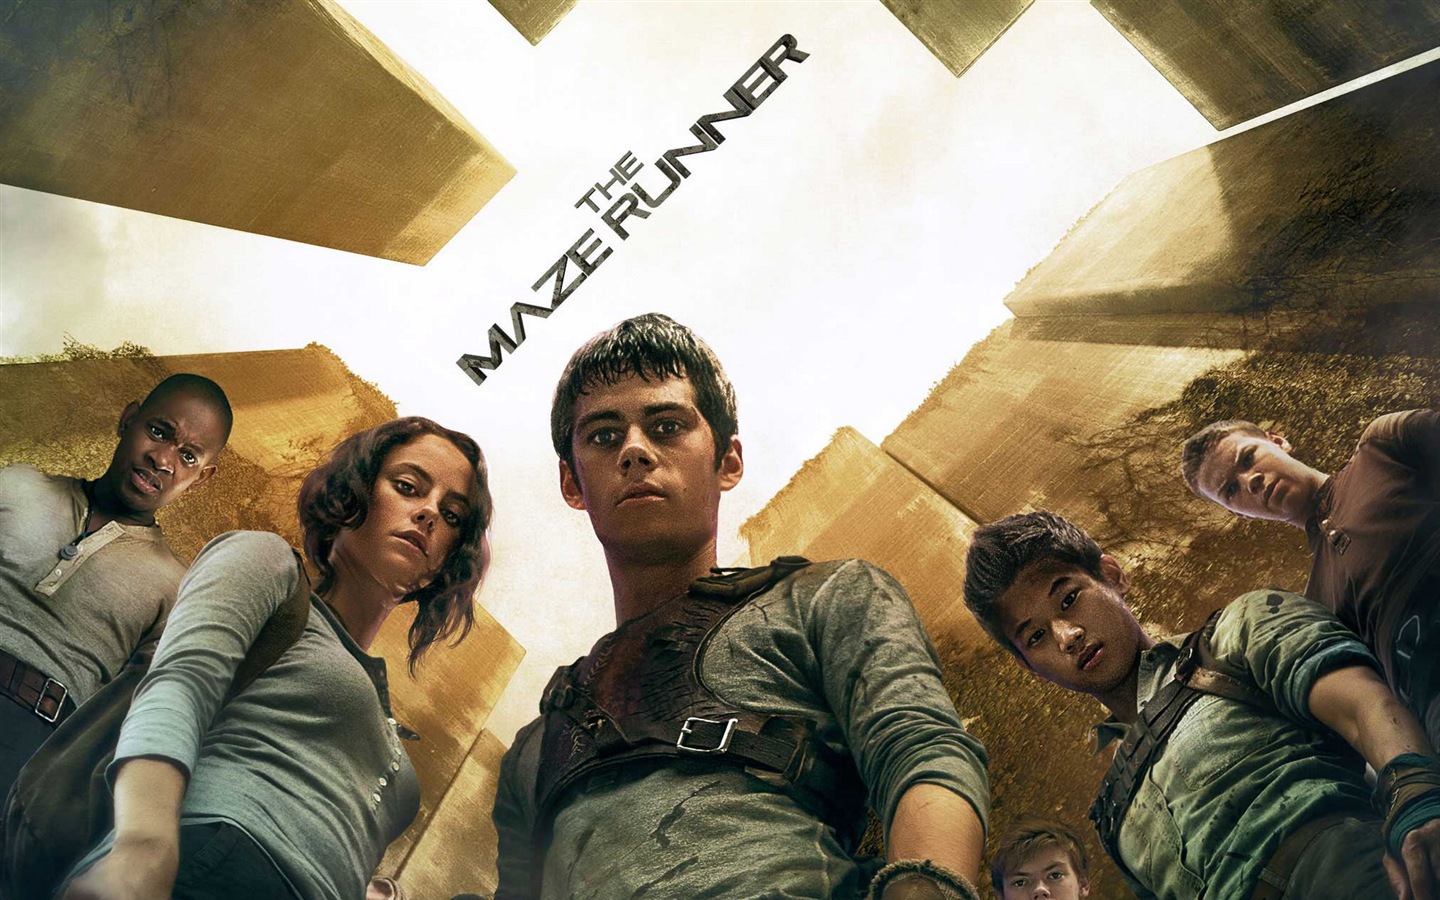 The Maze Runner HD movie wallpapers #4 - 1440x900